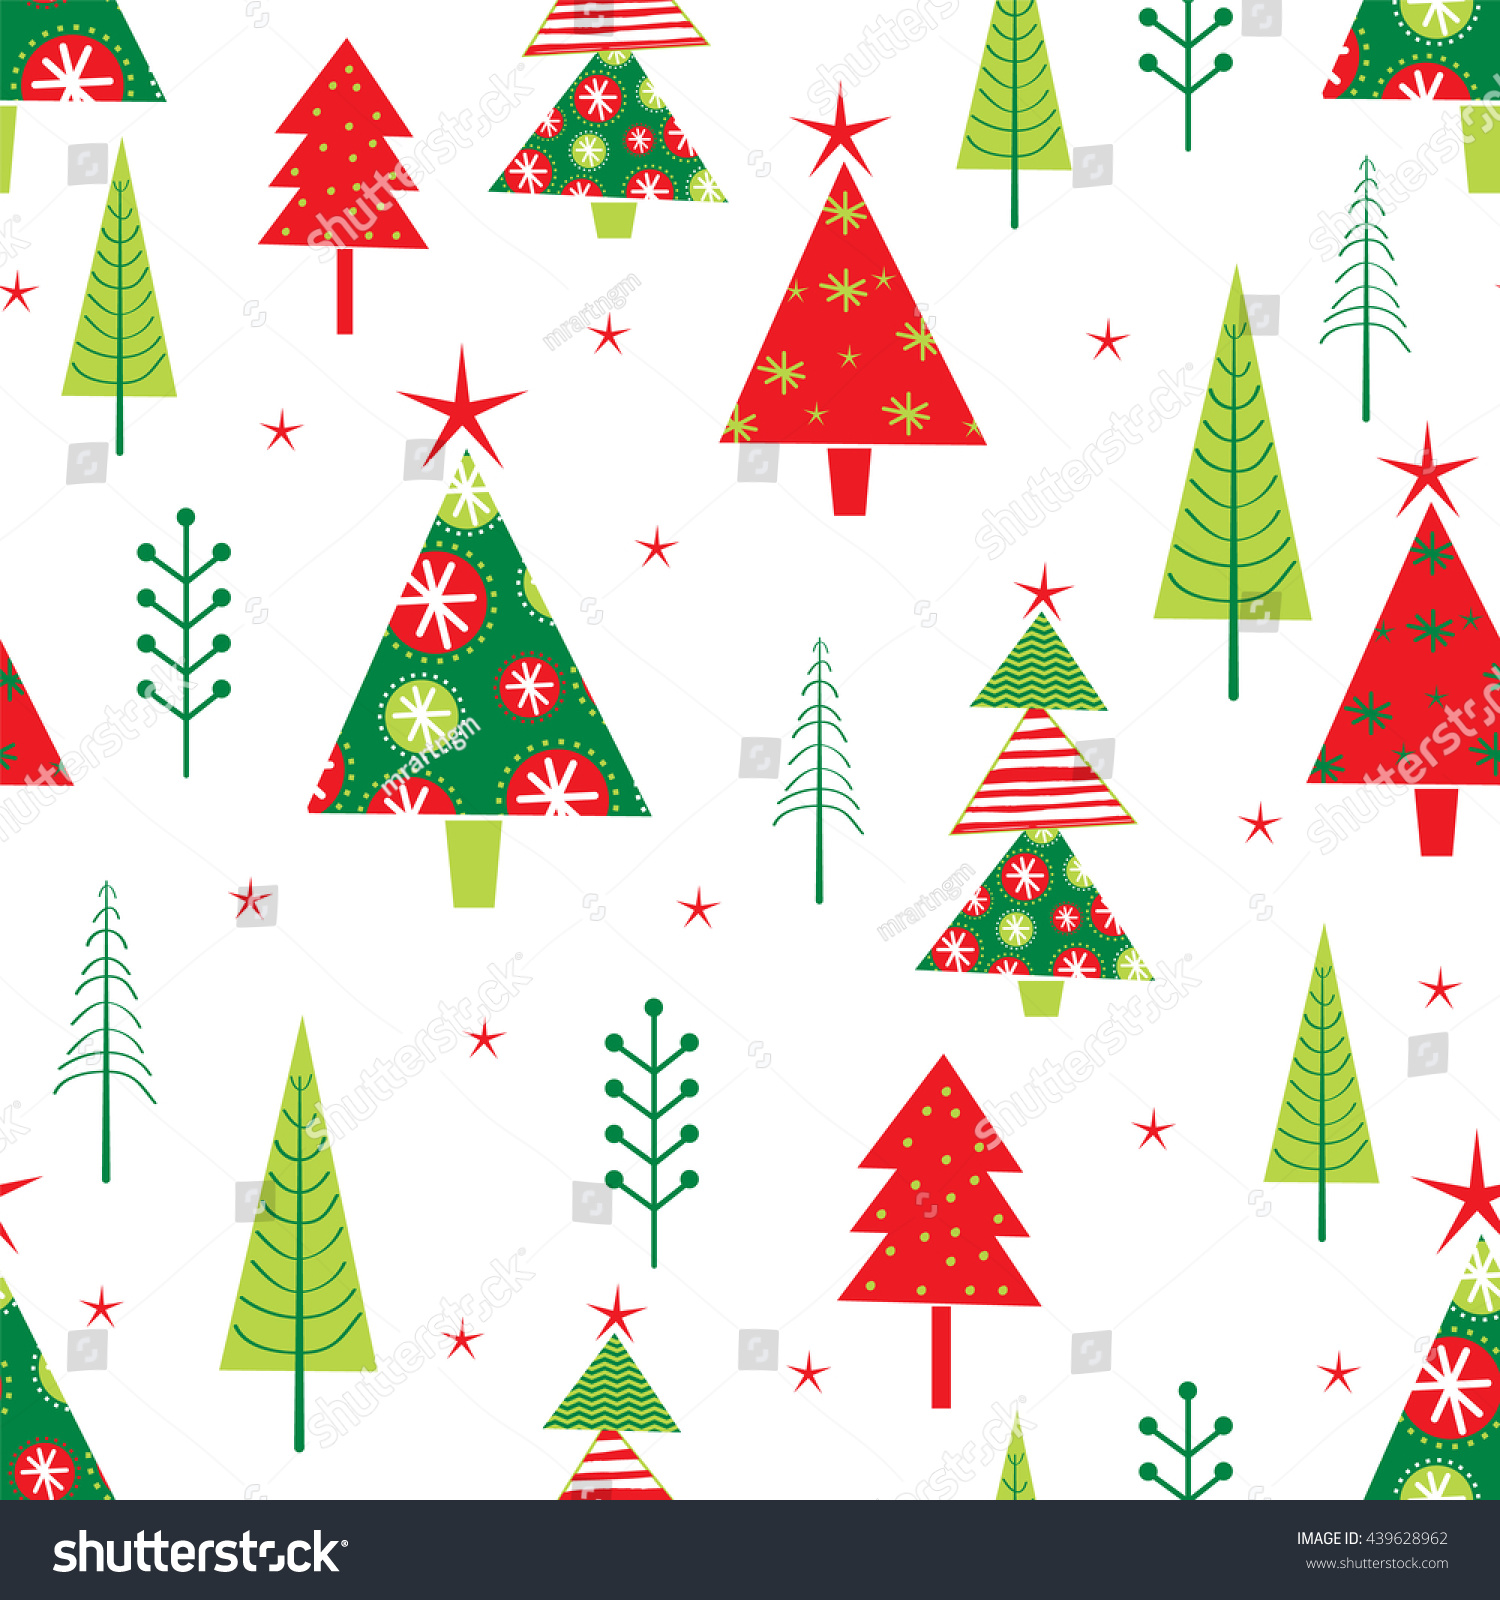 Seamless Background Christmas Tree Design Stock Vector (Royalty Free ...